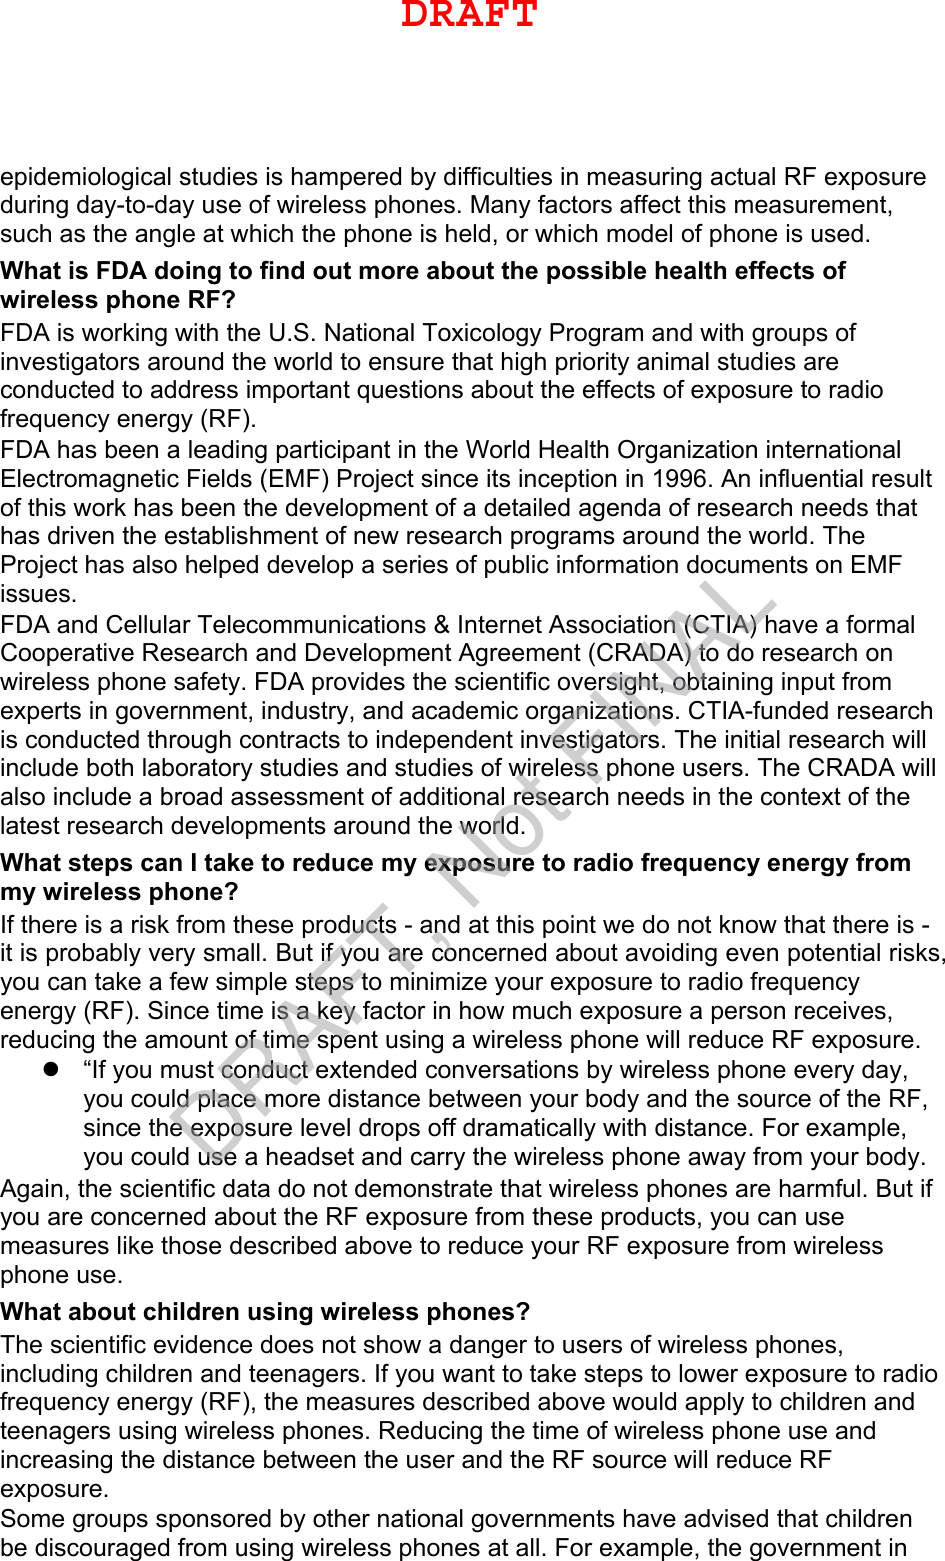 epidemiological studies is hampered by difficulties in measuring actual RF exposure during day-to-day use of wireless phones. Many factors affect this measurement, such as the angle at which the phone is held, or which model of phone is used. What is FDA doing to find out more about the possible health effects of wireless phone RF? FDA is working with the U.S. National Toxicology Program and with groups of investigators around the world to ensure that high priority animal studies are conducted to address important questions about the effects of exposure to radio frequency energy (RF). FDA has been a leading participant in the World Health Organization international Electromagnetic Fields (EMF) Project since its inception in 1996. An influential result of this work has been the development of a detailed agenda of research needs that has driven the establishment of new research programs around the world. The Project has also helped develop a series of public information documents on EMF issues. FDA and Cellular Telecommunications &amp; Internet Association (CTIA) have a formal Cooperative Research and Development Agreement (CRADA) to do research on wireless phone safety. FDA provides the scientific oversight, obtaining input from experts in government, industry, and academic organizations. CTIA-funded research is conducted through contracts to independent investigators. The initial research will include both laboratory studies and studies of wireless phone users. The CRADA will also include a broad assessment of additional research needs in the context of the latest research developments around the world. What steps can I take to reduce my exposure to radio frequency energy from my wireless phone? If there is a risk from these products - and at this point we do not know that there is - it is probably very small. But if you are concerned about avoiding even potential risks, you can take a few simple steps to minimize your exposure to radio frequency energy (RF). Since time is a key factor in how much exposure a person receives, reducing the amount of time spent using a wireless phone will reduce RF exposure. “If you must conduct extended conversations by wireless phone every day,you could place more distance between your body and the source of the RF,since the exposure level drops off dramatically with distance. For example,you could use a headset and carry the wireless phone away from your body.Again, the scientific data do not demonstrate that wireless phones are harmful. But if you are concerned about the RF exposure from these products, you can use measures like those described above to reduce your RF exposure from wireless phone use. What about children using wireless phones? The scientific evidence does not show a danger to users of wireless phones, including children and teenagers. If you want to take steps to lower exposure to radio frequency energy (RF), the measures described above would apply to children and teenagers using wireless phones. Reducing the time of wireless phone use and increasing the distance between the user and the RF source will reduce RF exposure. Some groups sponsored by other national governments have advised that children be discouraged from using wireless phones at all. For example, the government in DRAFTDRAFT, Not FINAL